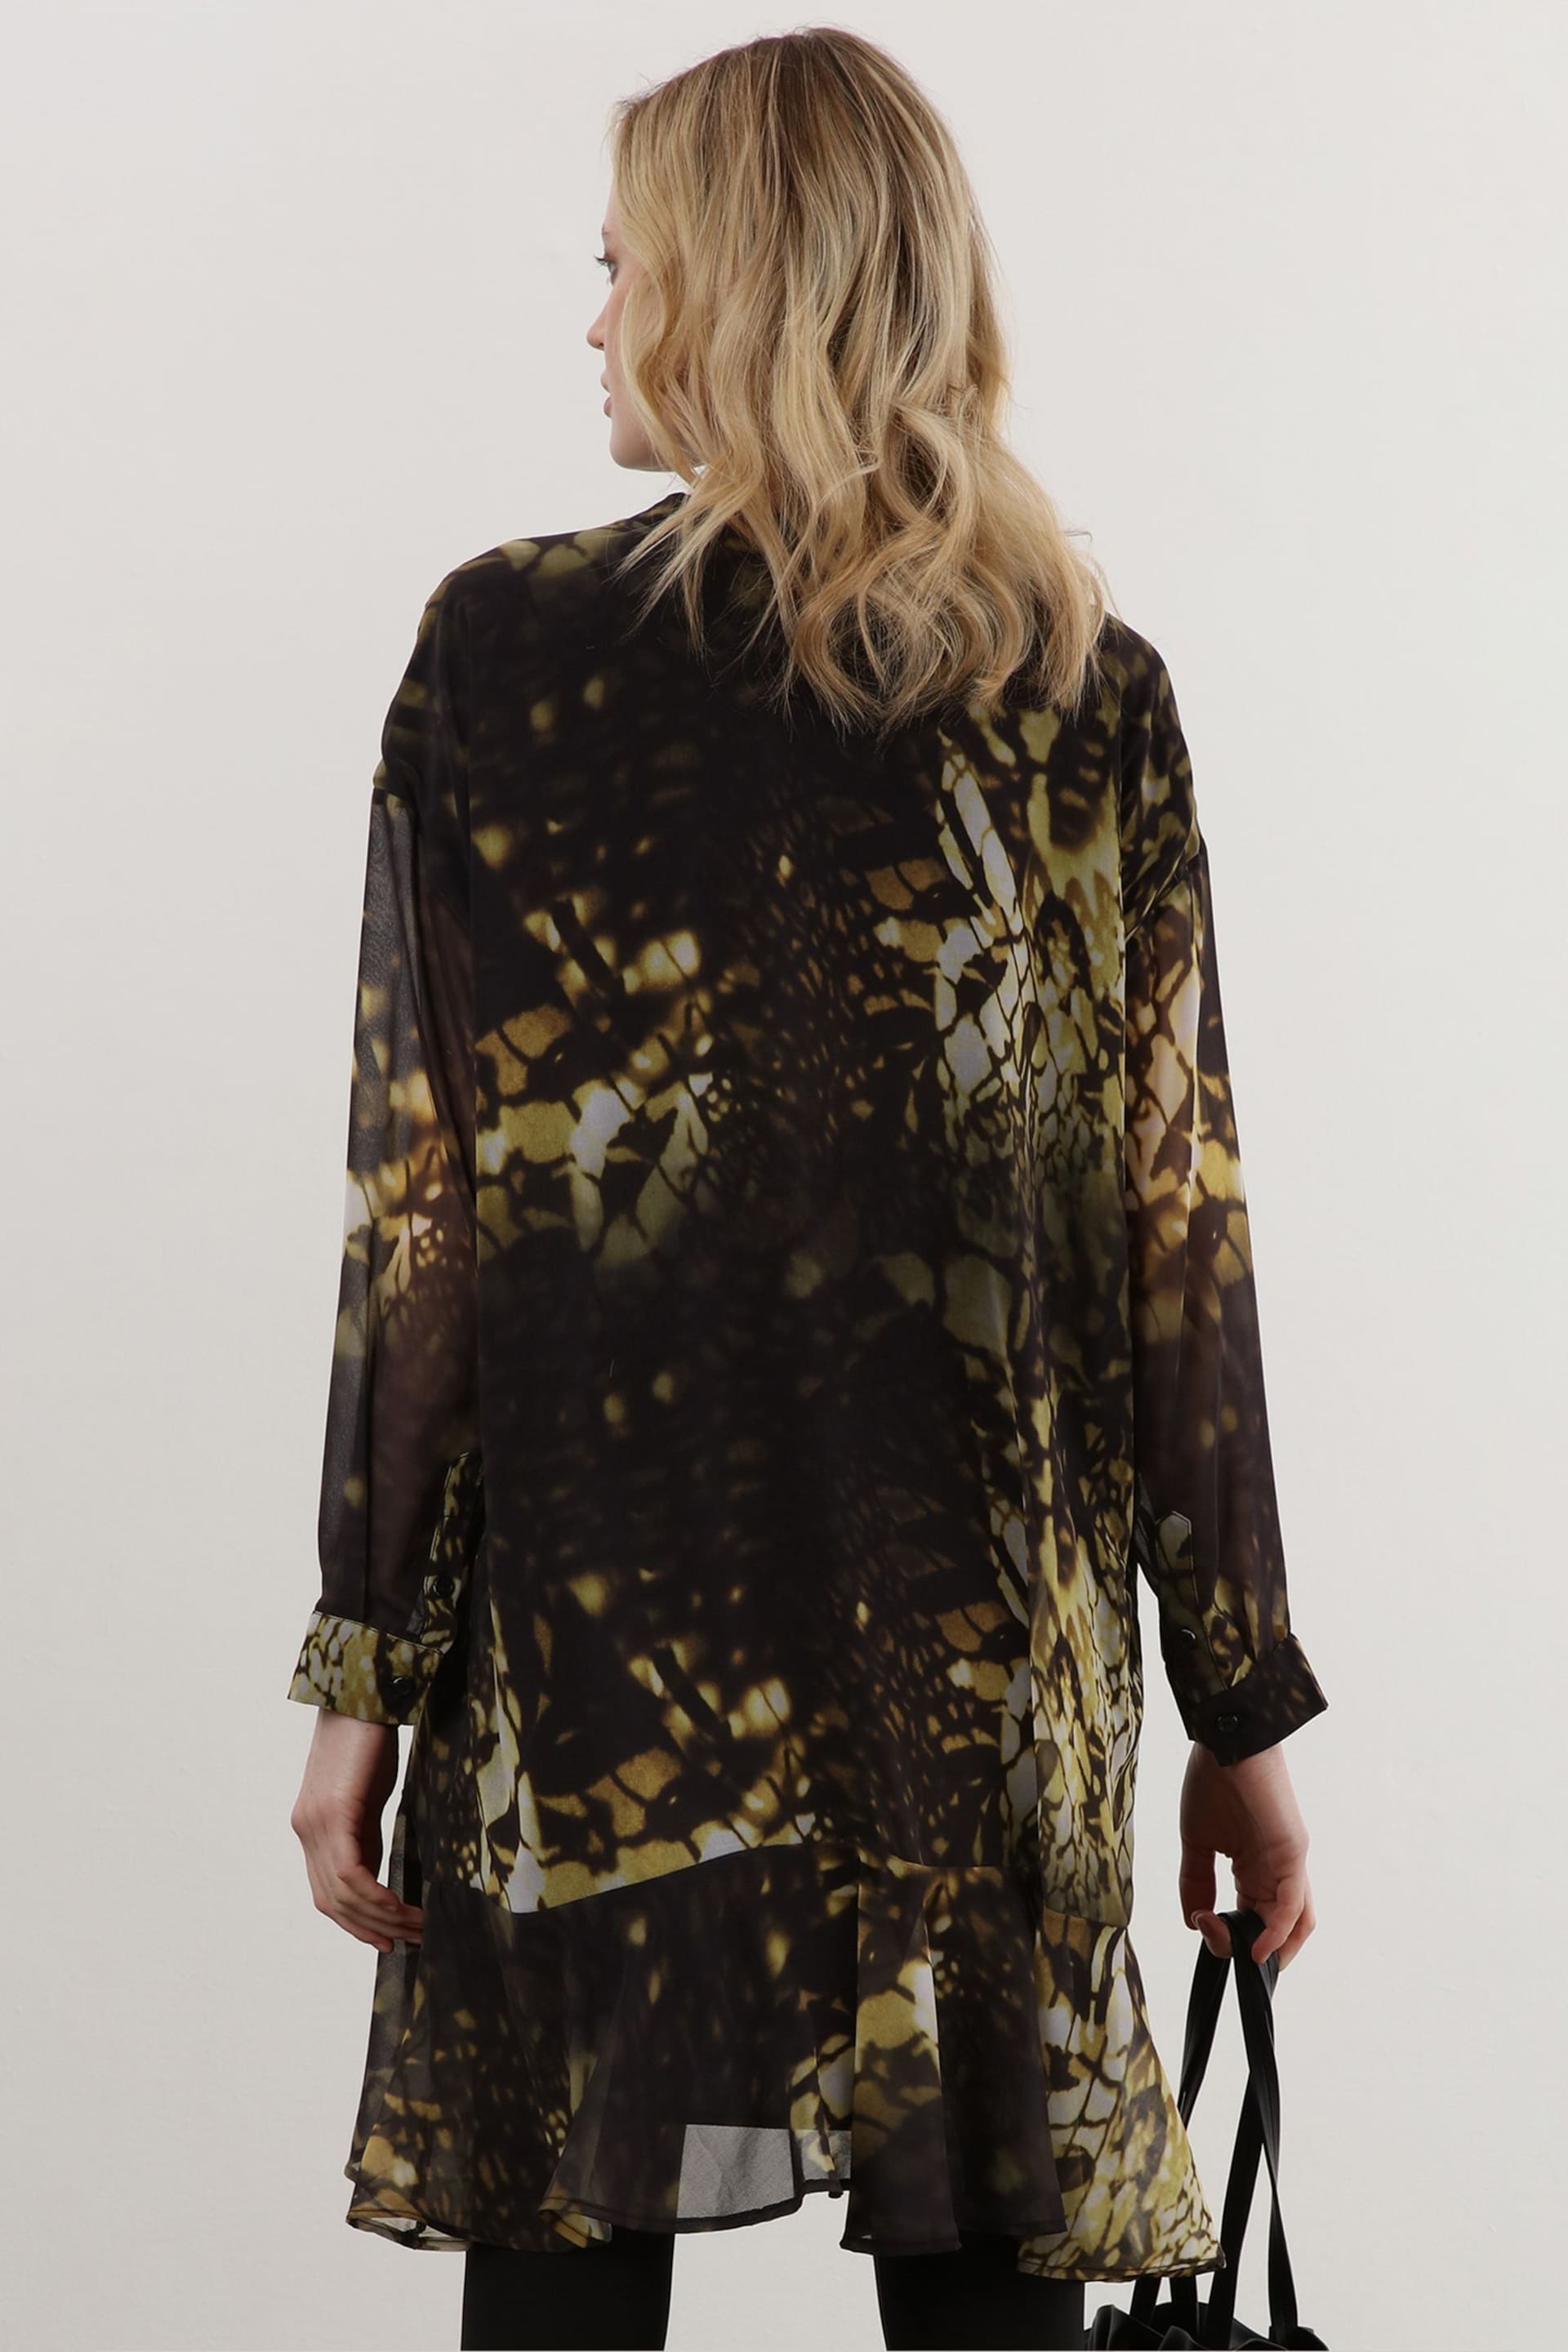 Religion Green Oversized Shirt Dress with Frill Hem and Pockets - Image 2 of 6